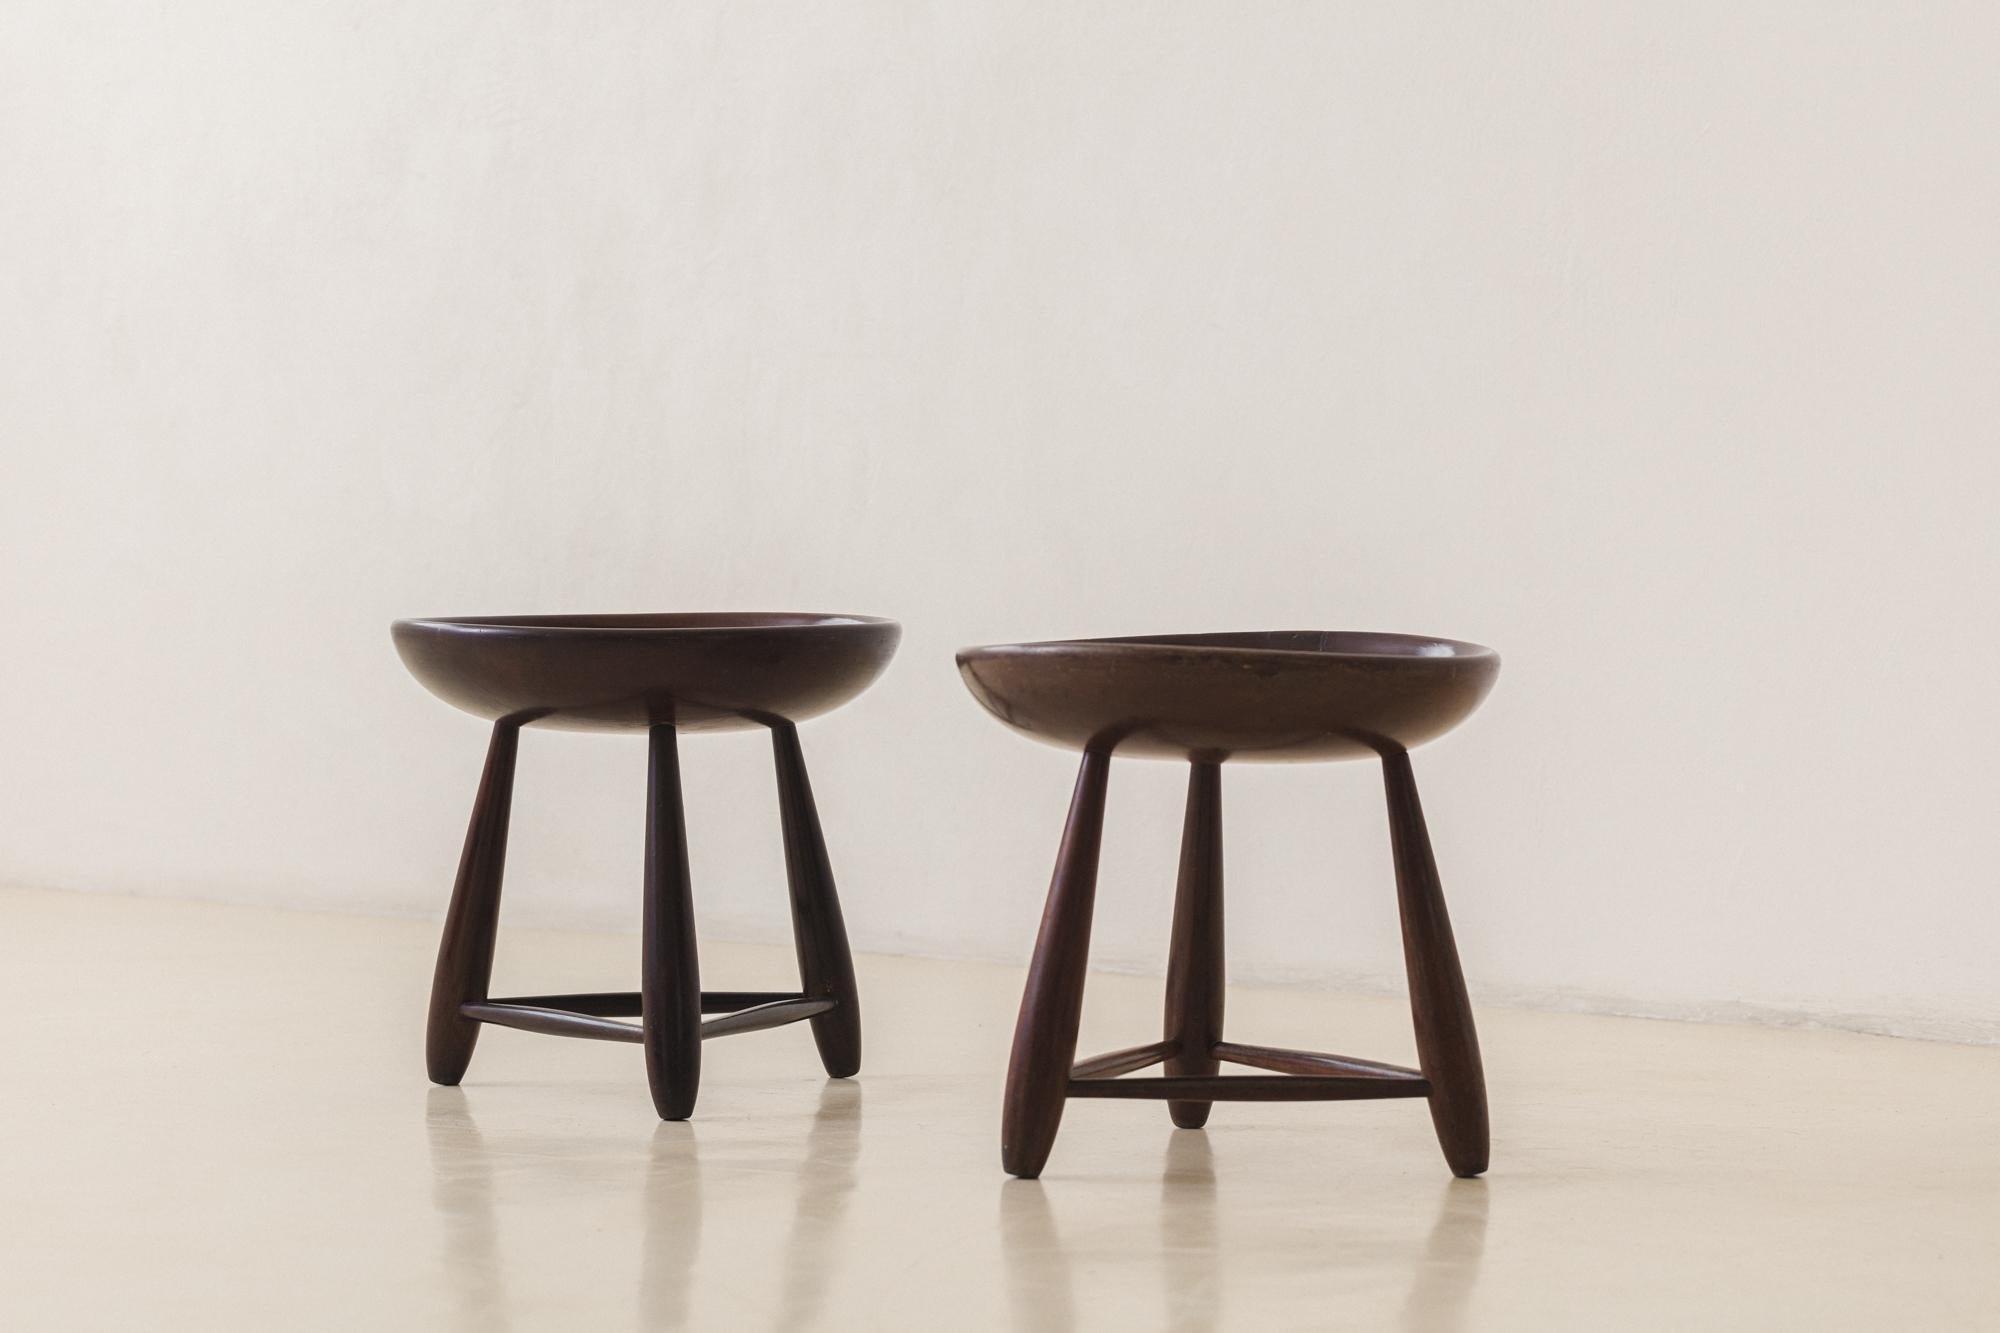 20th Century Pair of Vintage Mocho Stools by Sergio Rodrigues, Brazilian Mid-Century, 1954